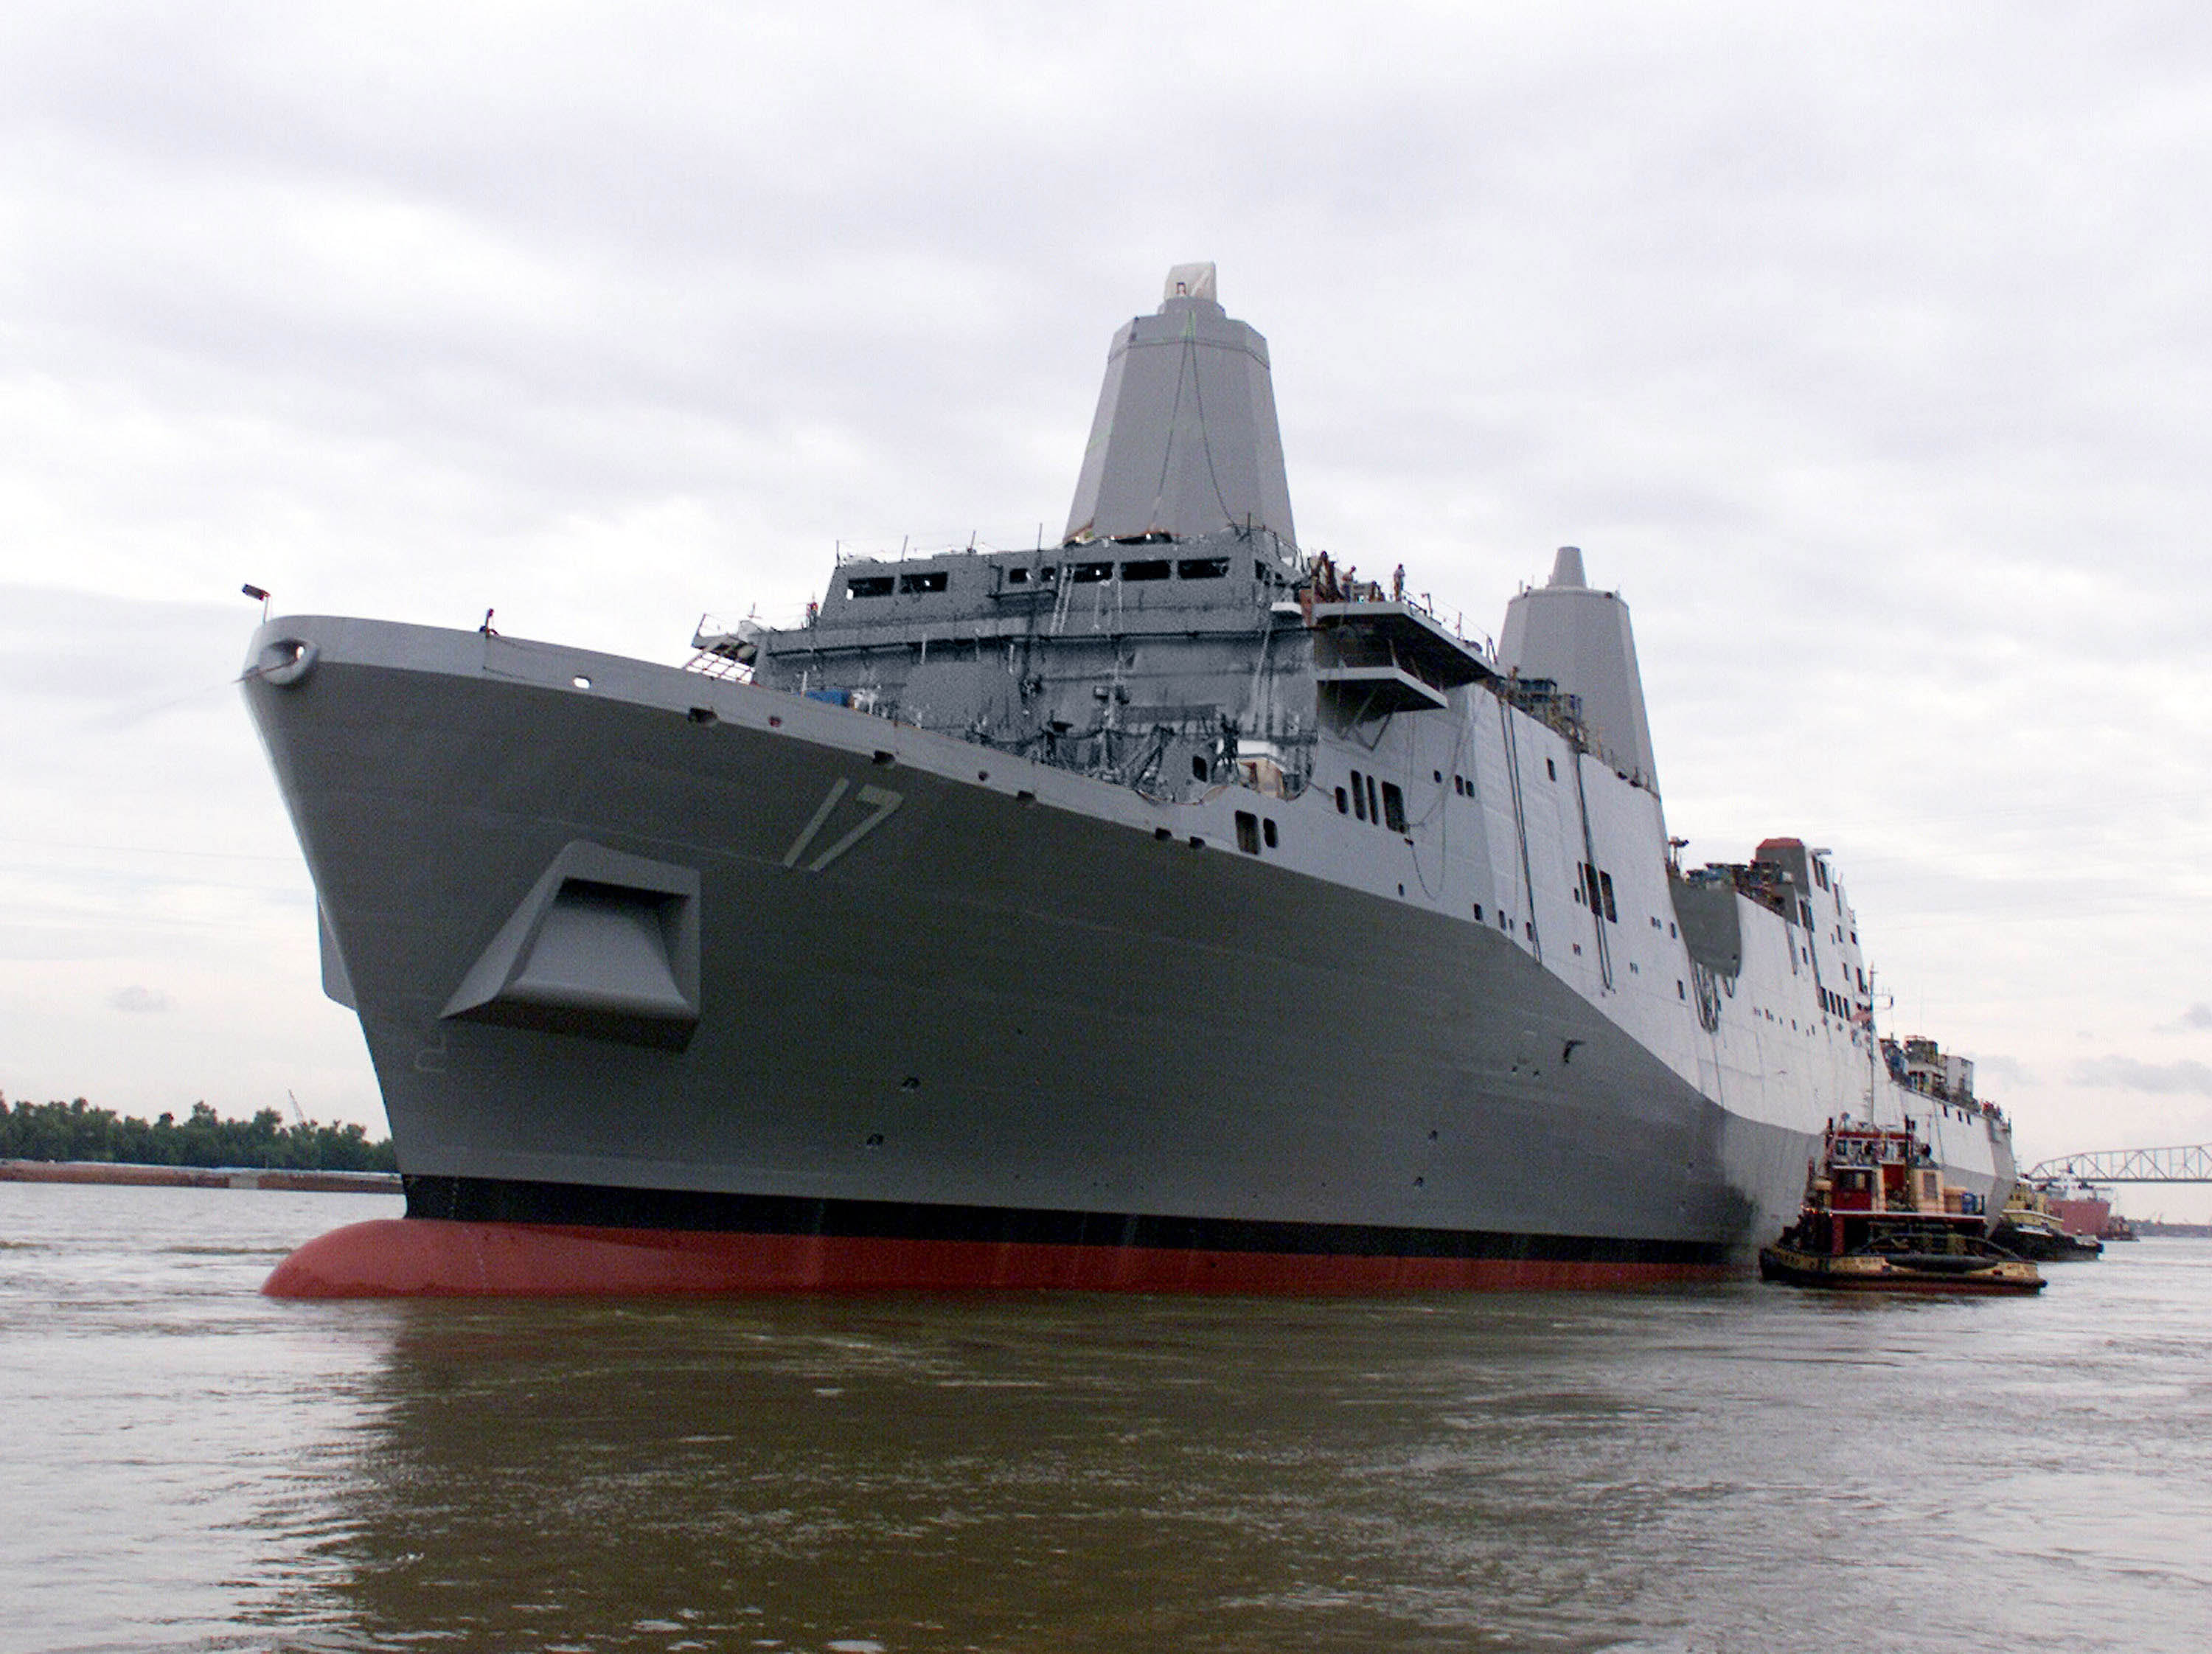 San Antonio (LPD-17) floats along the Mississippi River at the then Northrop Grumman Ship Systems Avondale Operations in New Orleans in 2003. Northrop Grumman Photo 